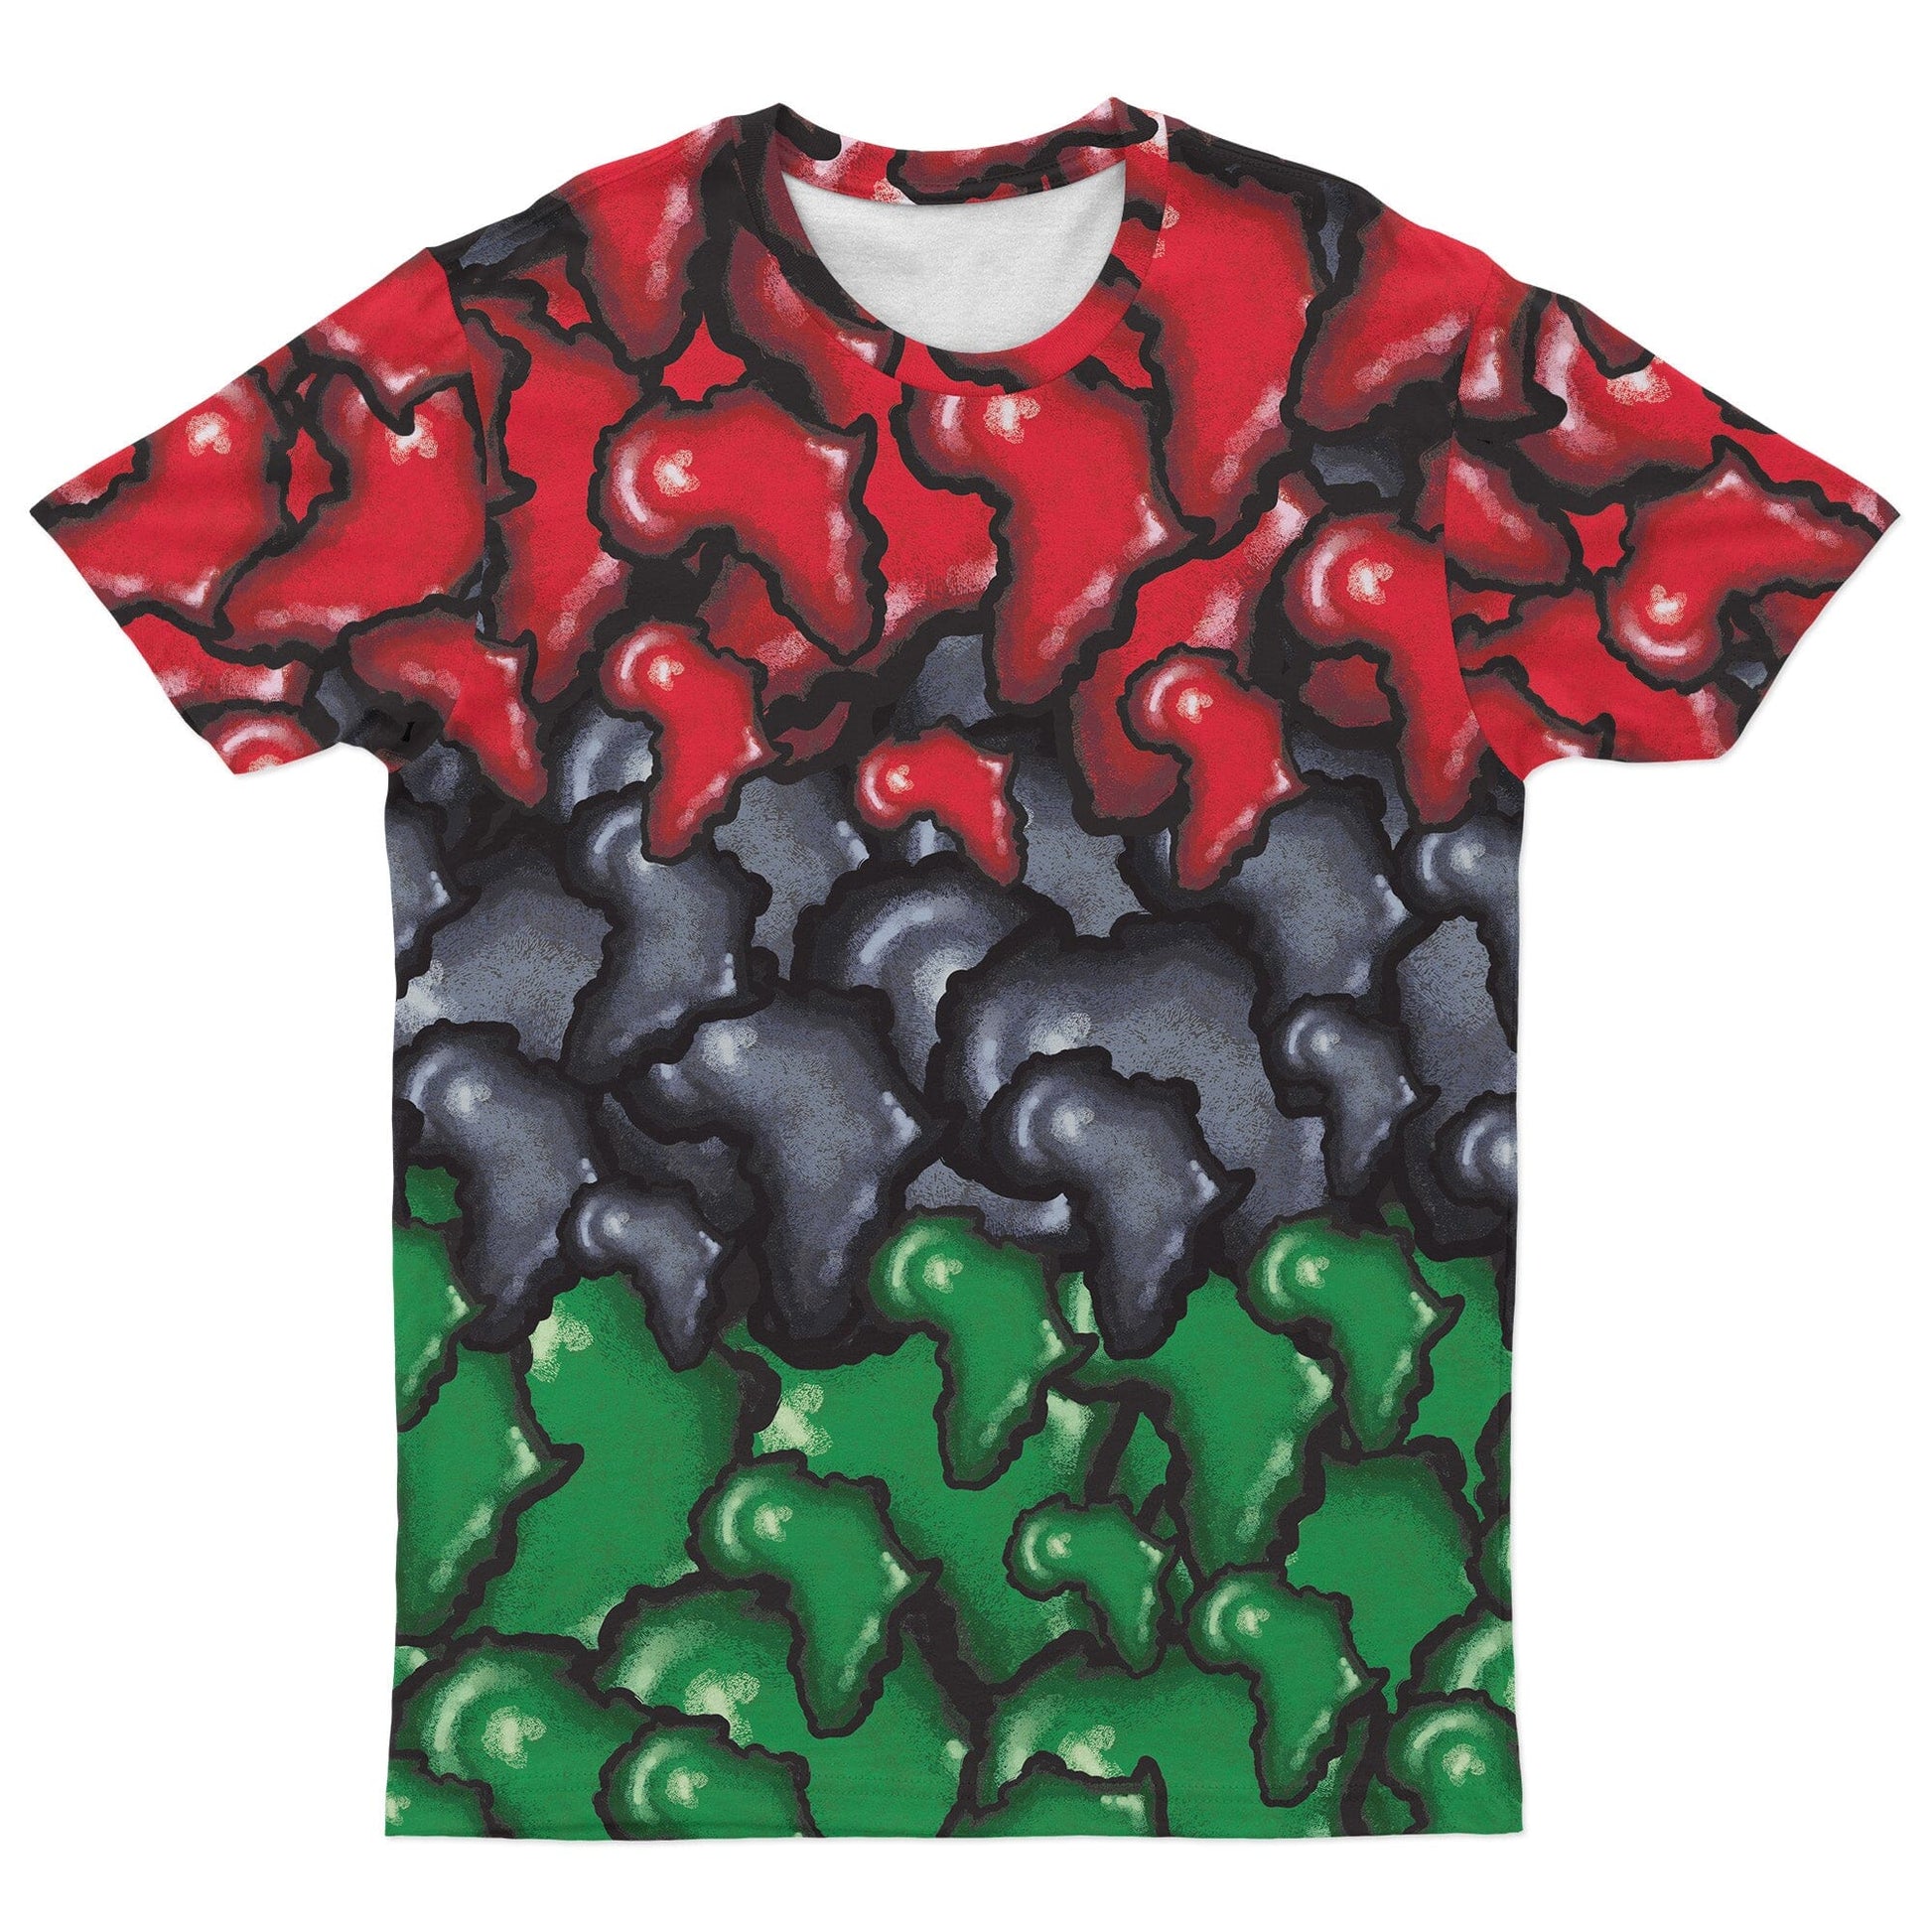 Africa-Shaped In Pan-African Colors T-shirt AOP Tee Tianci 